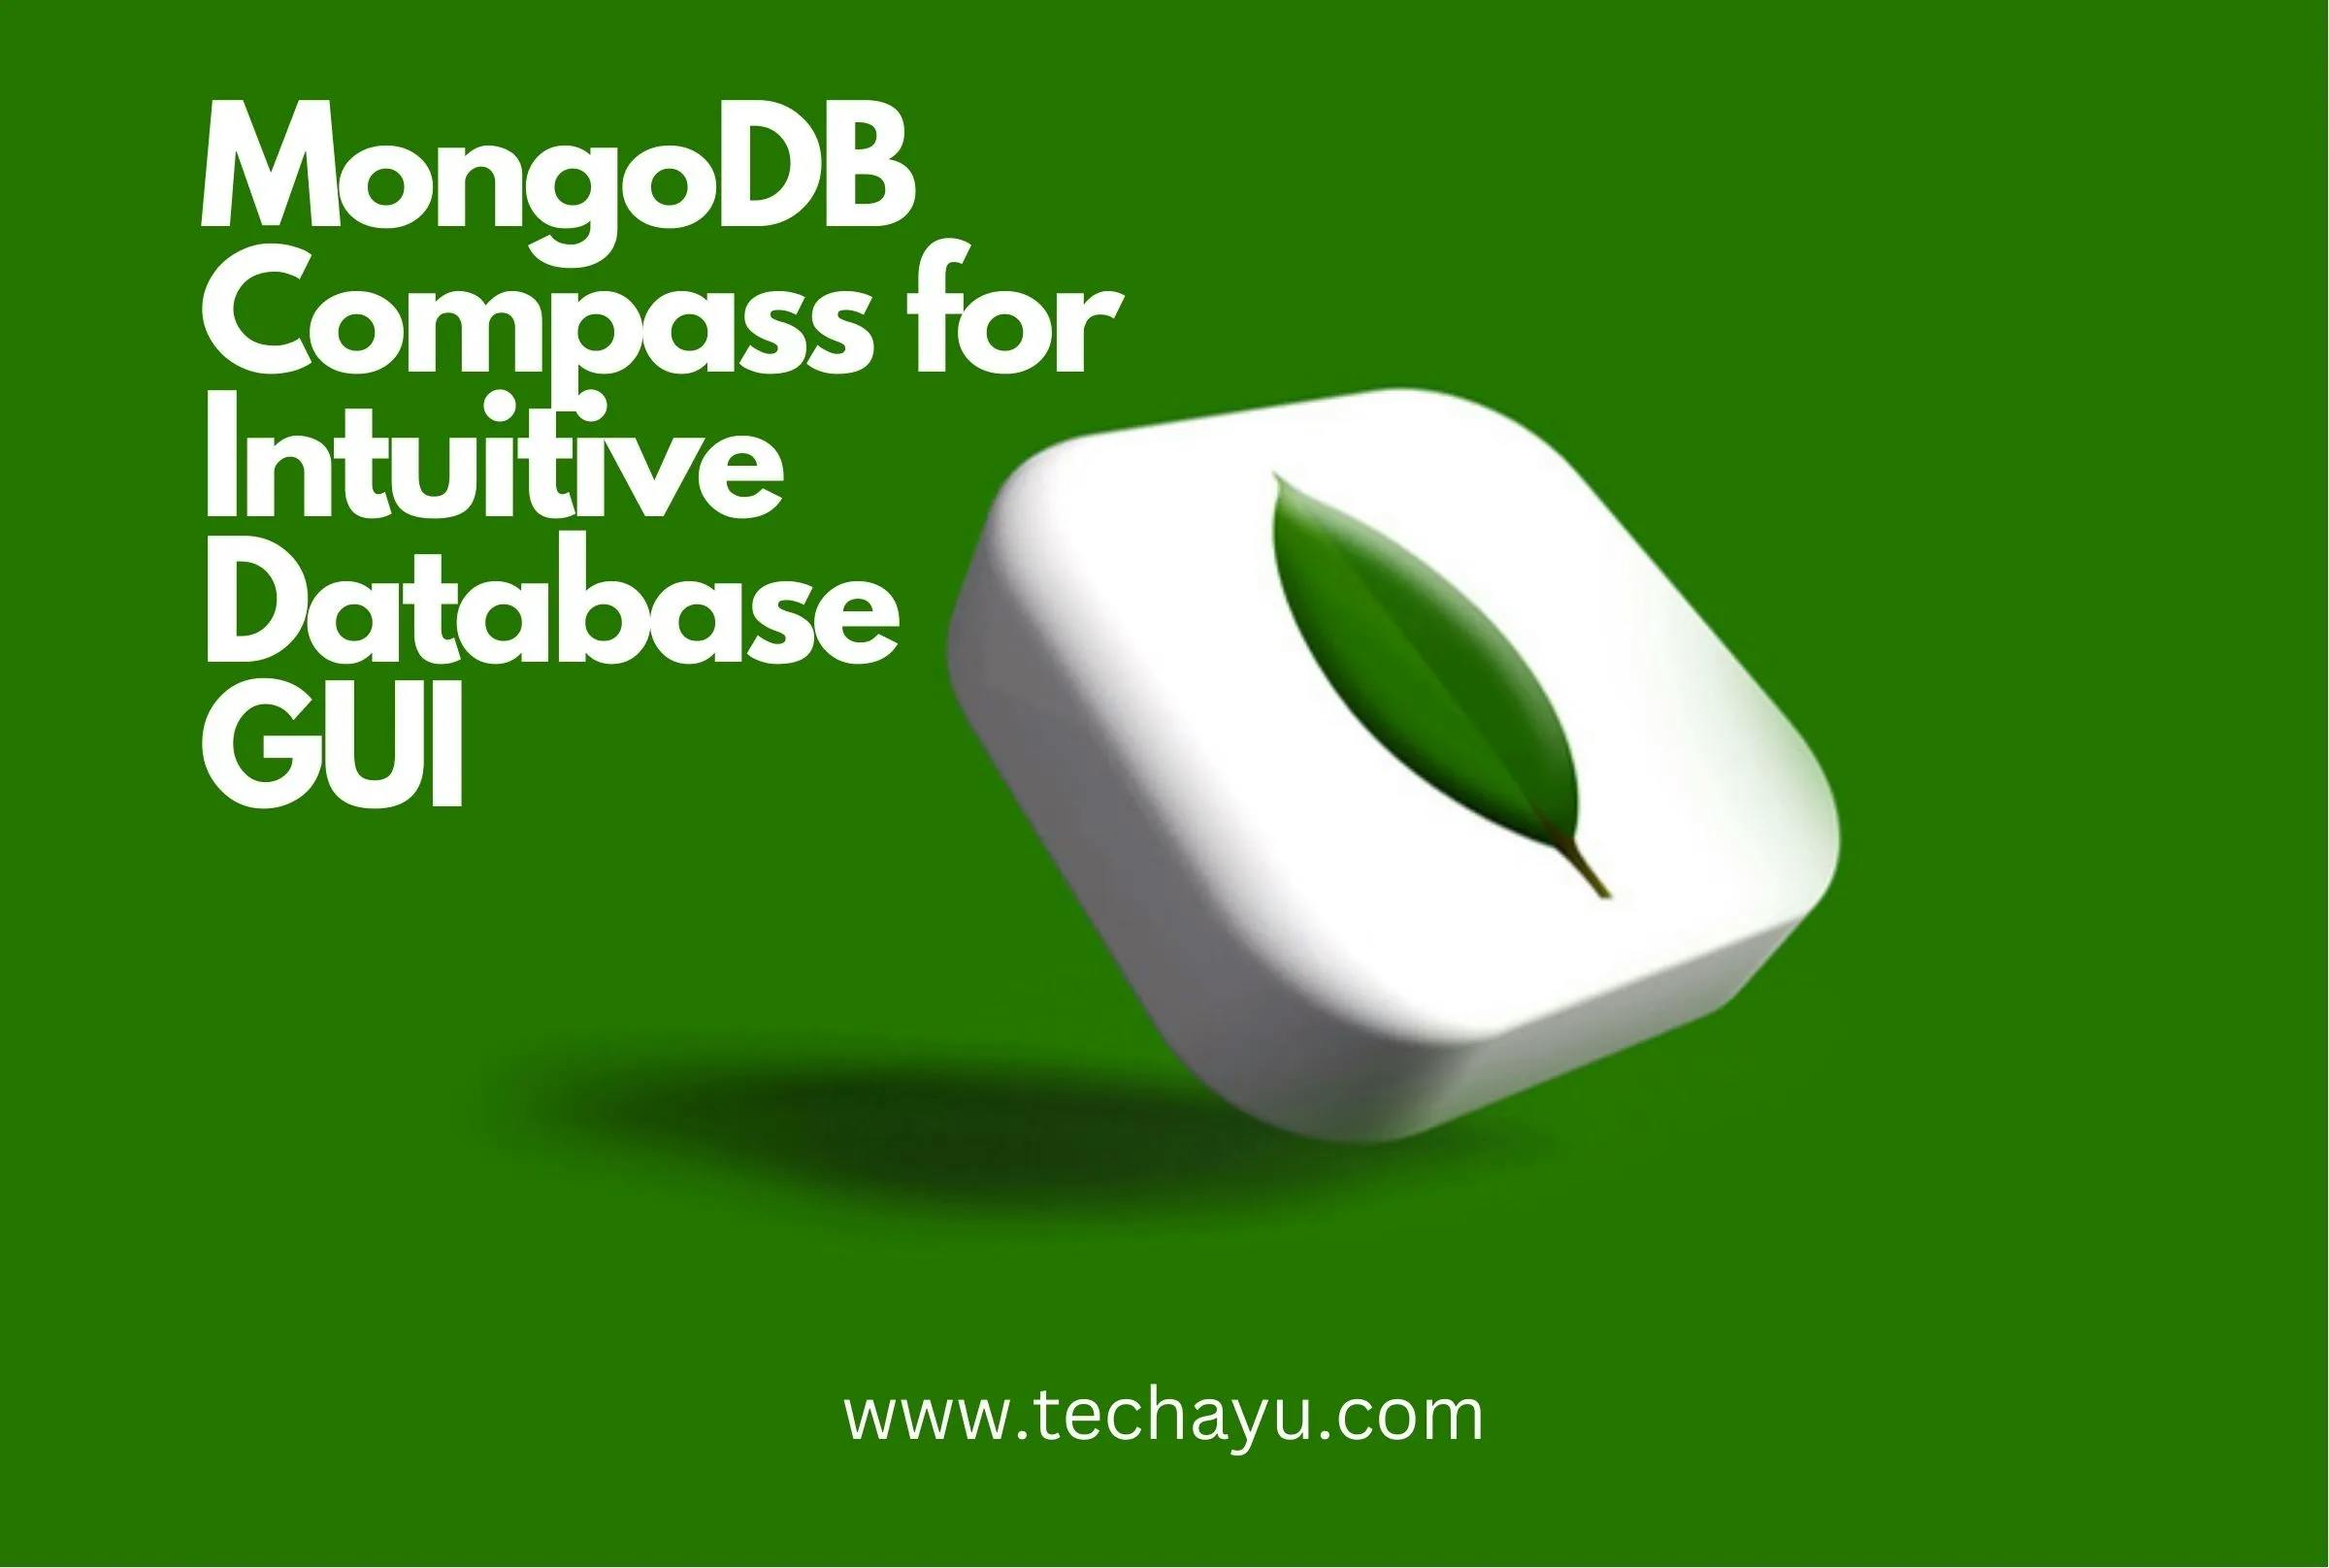 How to Use MongoDB Compass for Intuitive Database GUI